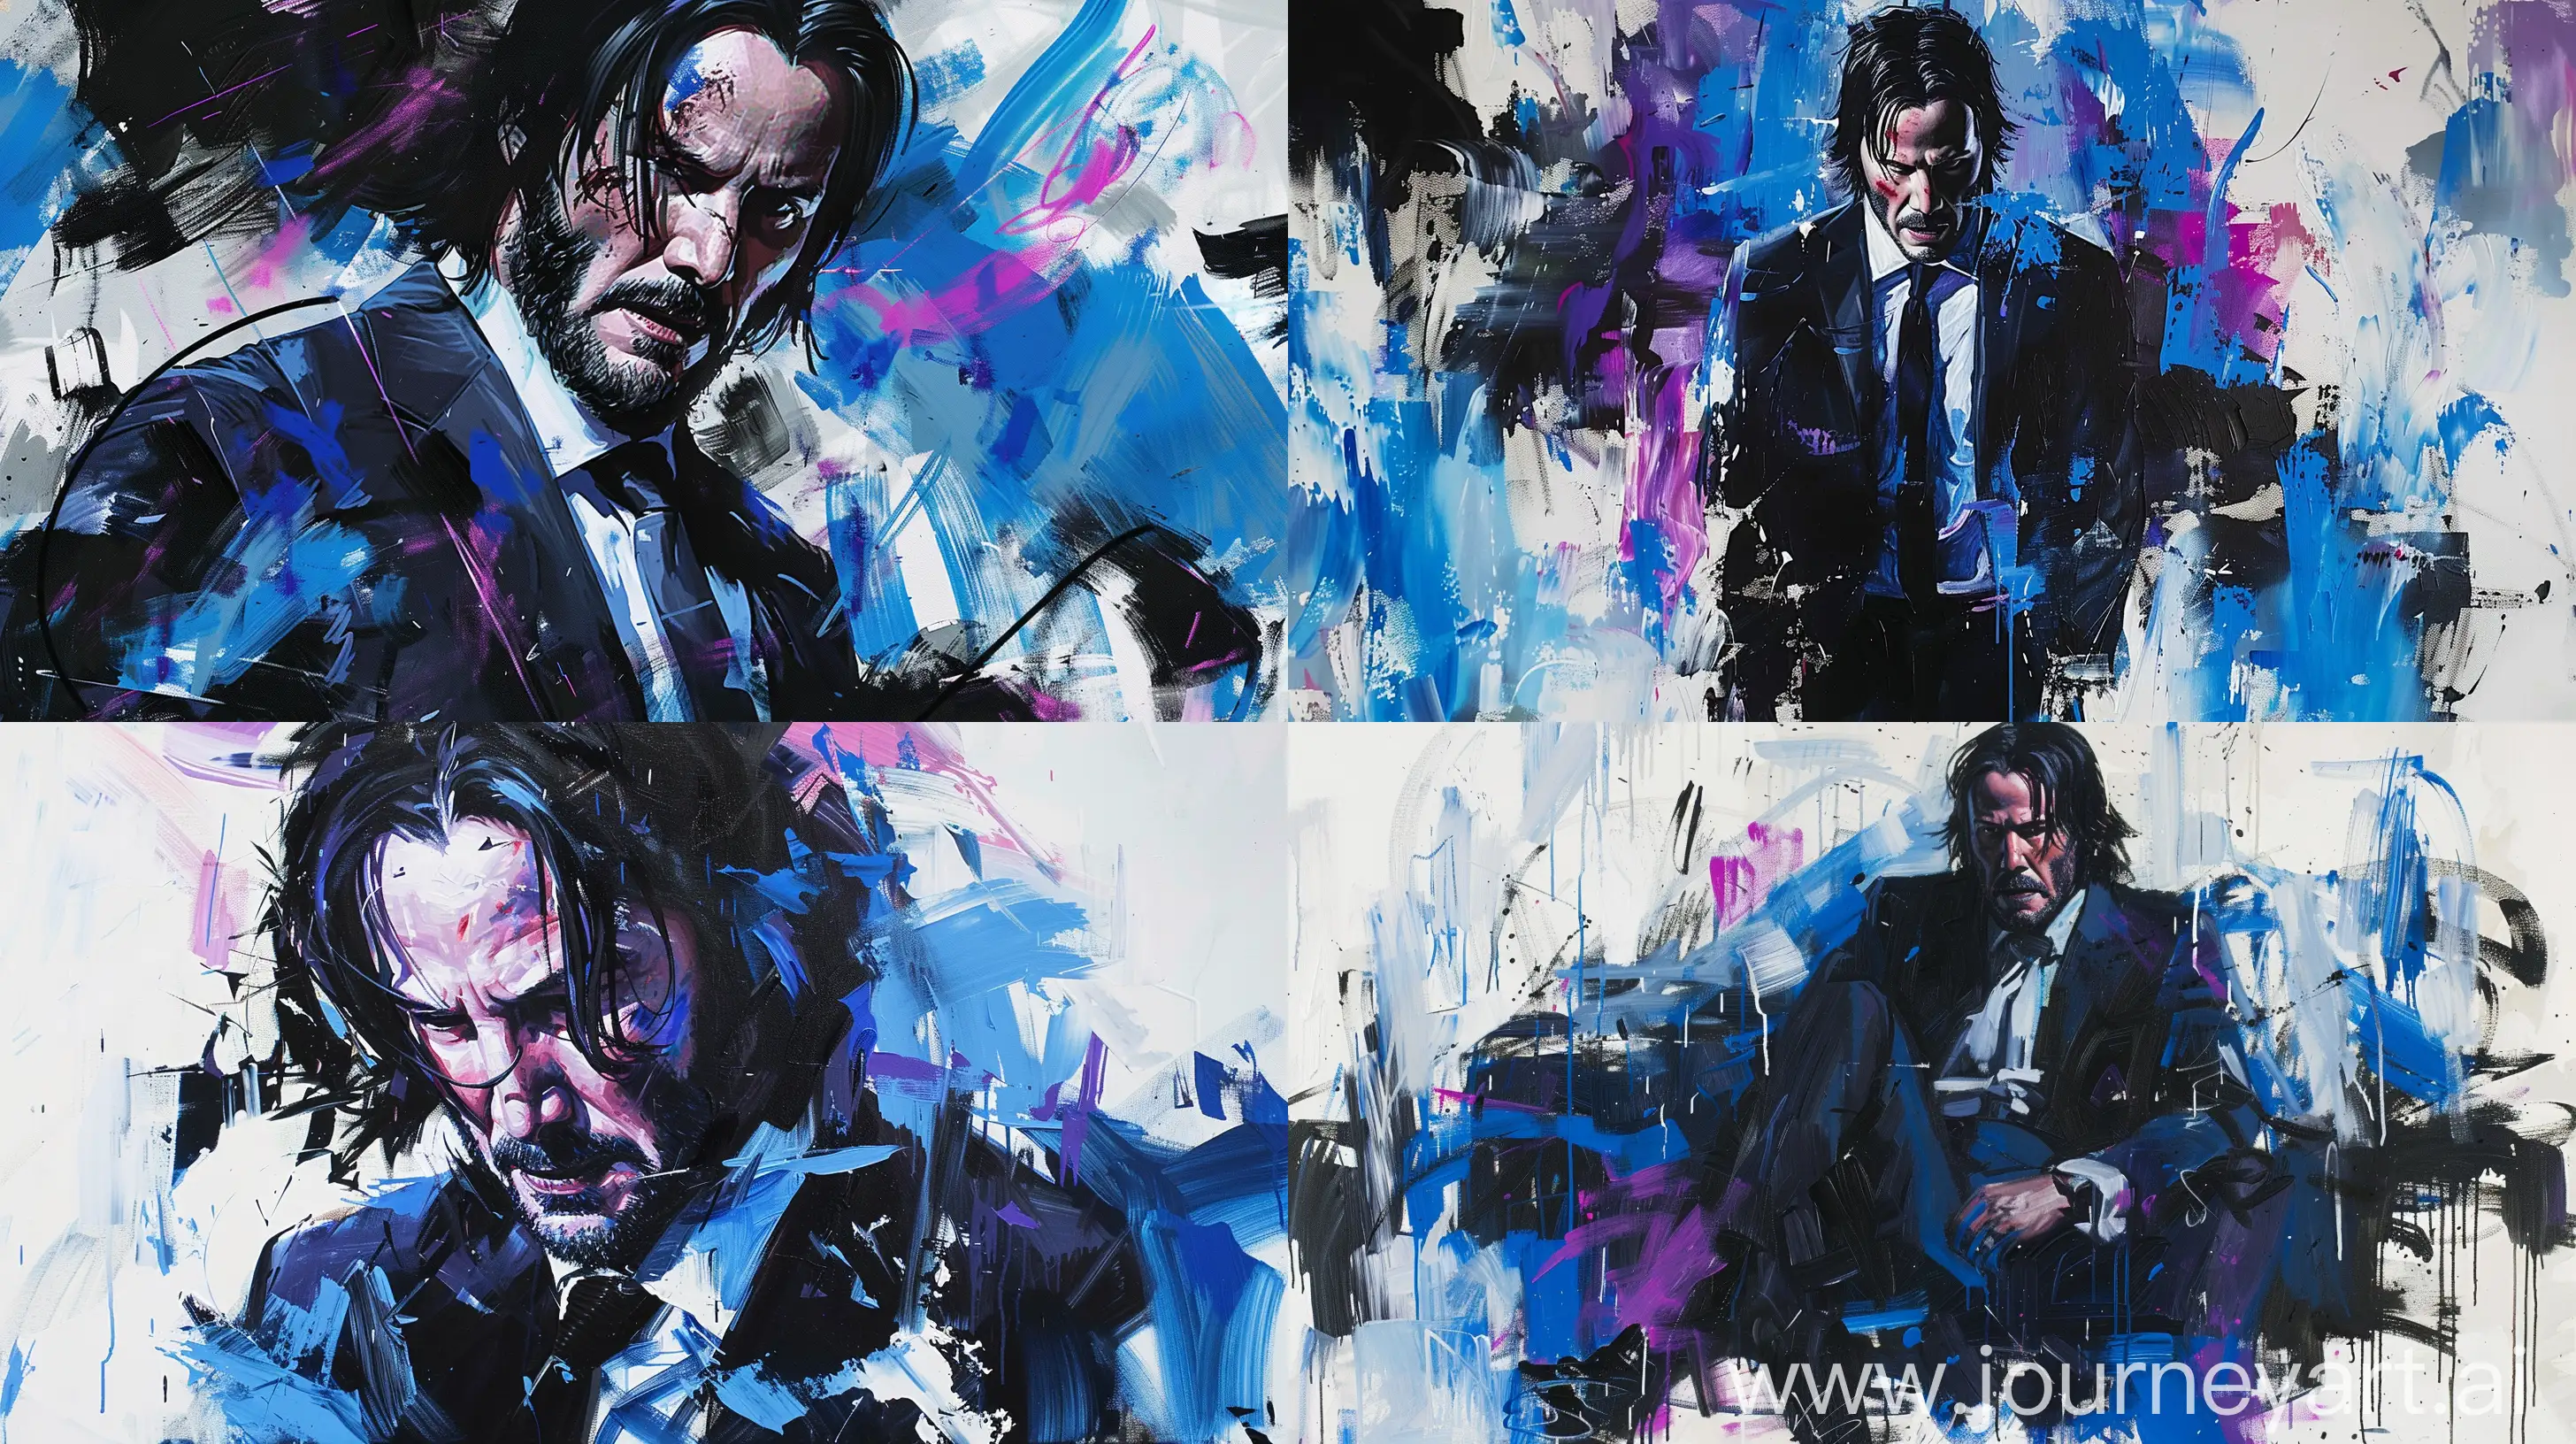 Dynamic-Oil-Painting-of-John-Wick-in-Blue-Black-and-Pink-Palette